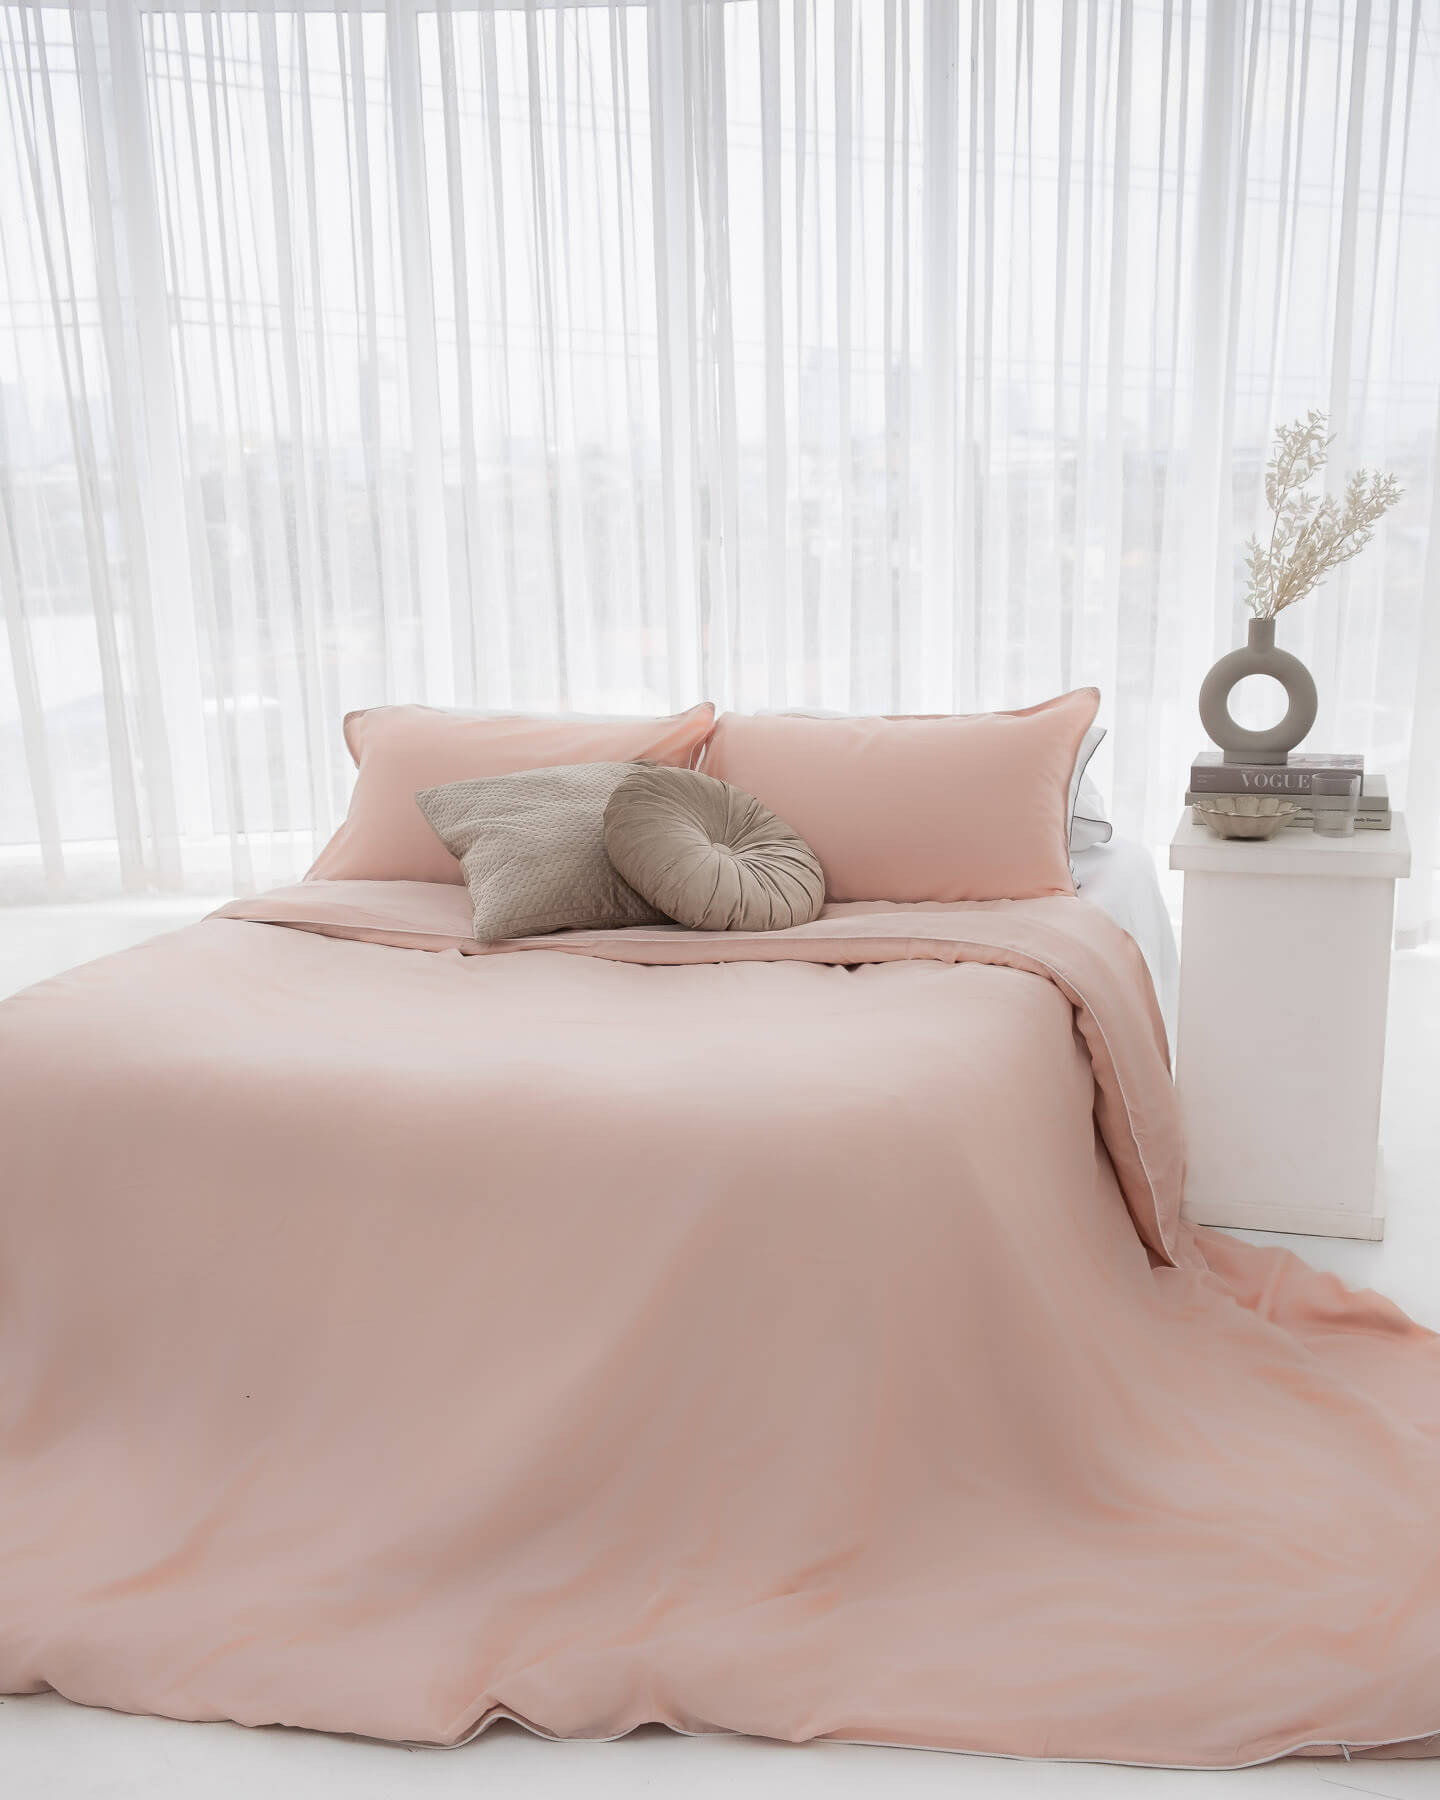 organic bamboo lyocell duvet cover and sheet set (fitted sheet and pillowcases) in silver lining (white with gray piping) and daydream blush (pink with white piping). ava and ava ph soft and cooling bedding sheets.